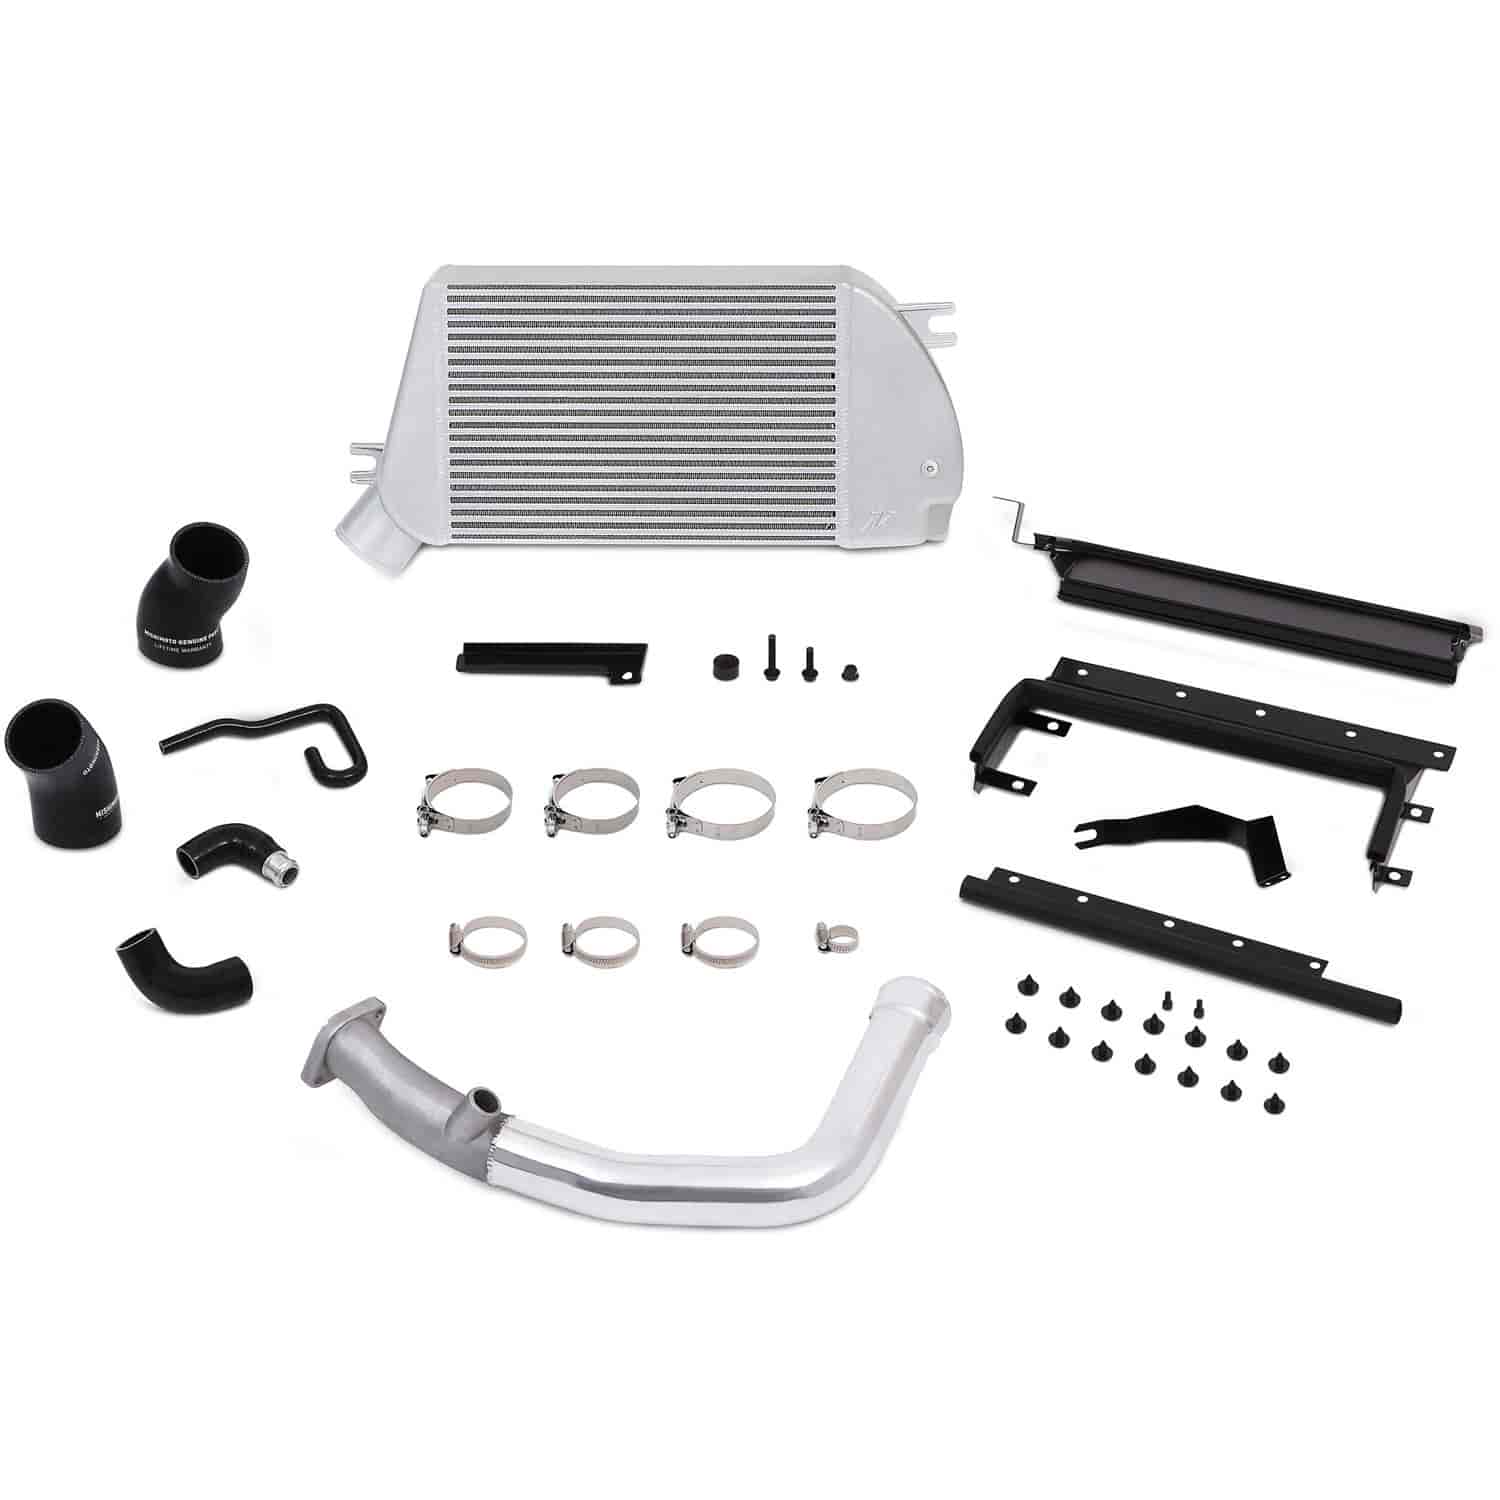 Subaru WRX Performance Top-Mount Intercooler and Charge Pipe System - MFG Part No. MMTMIC-WRX-15PSL